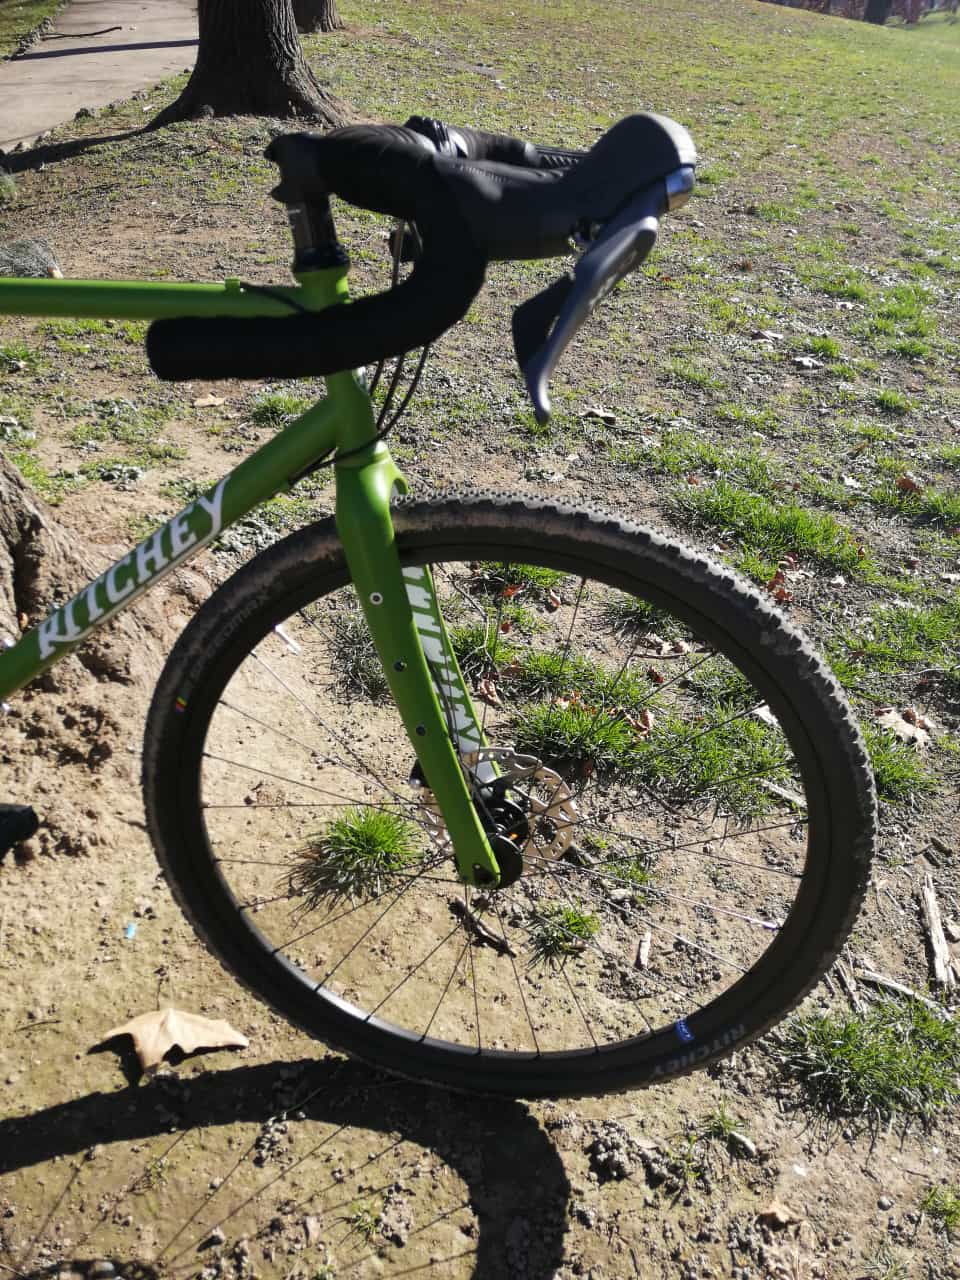 Ritchey Outback Test